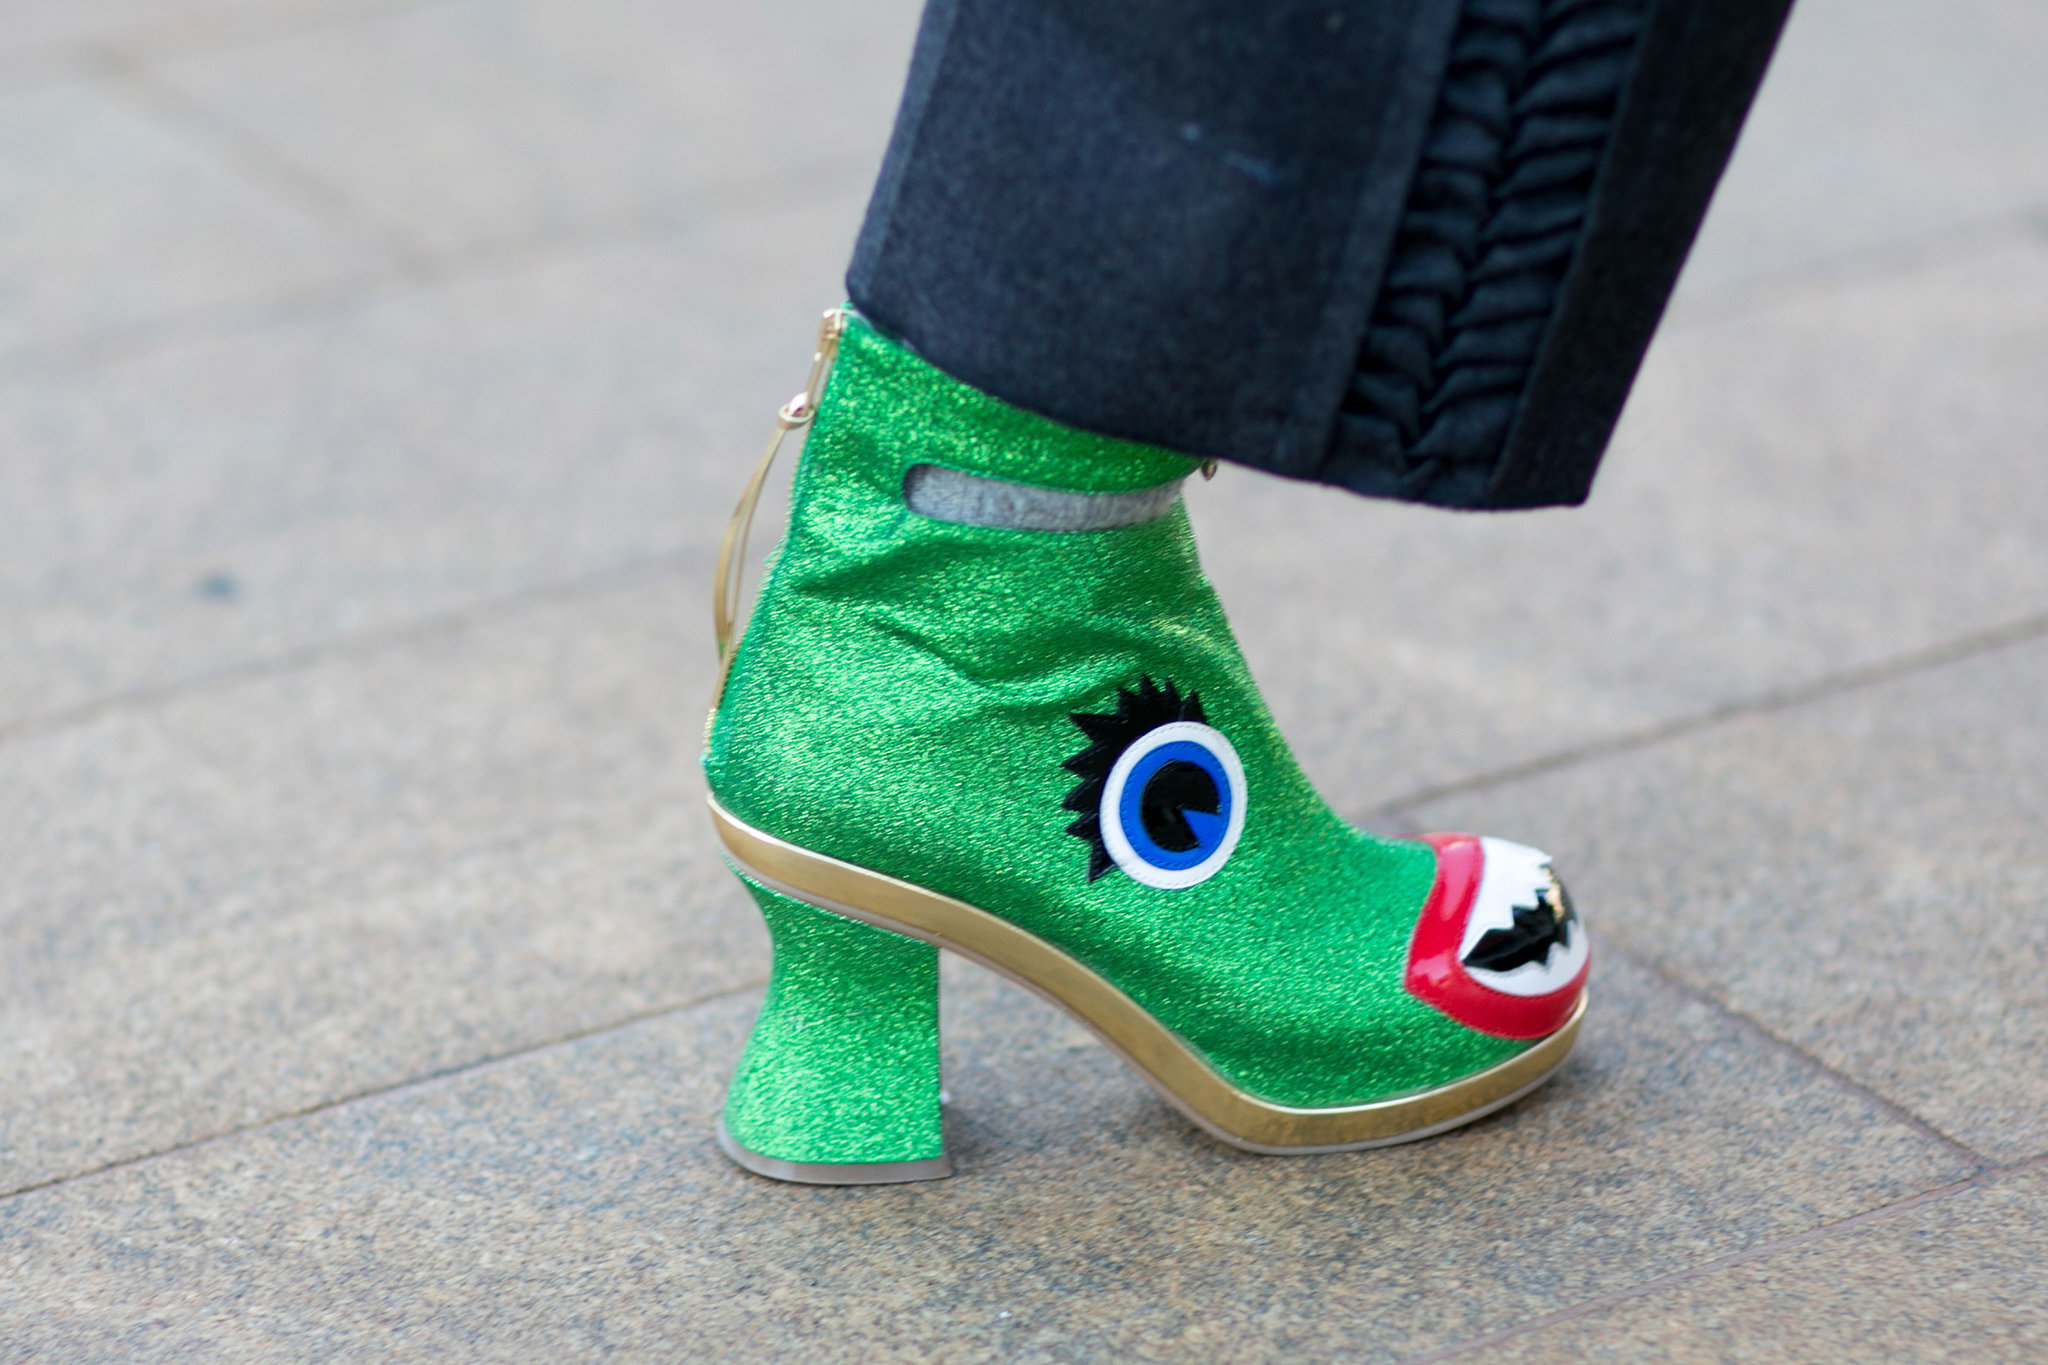 Preetma Singh's kooky boots take the prize for most original footwear. 
